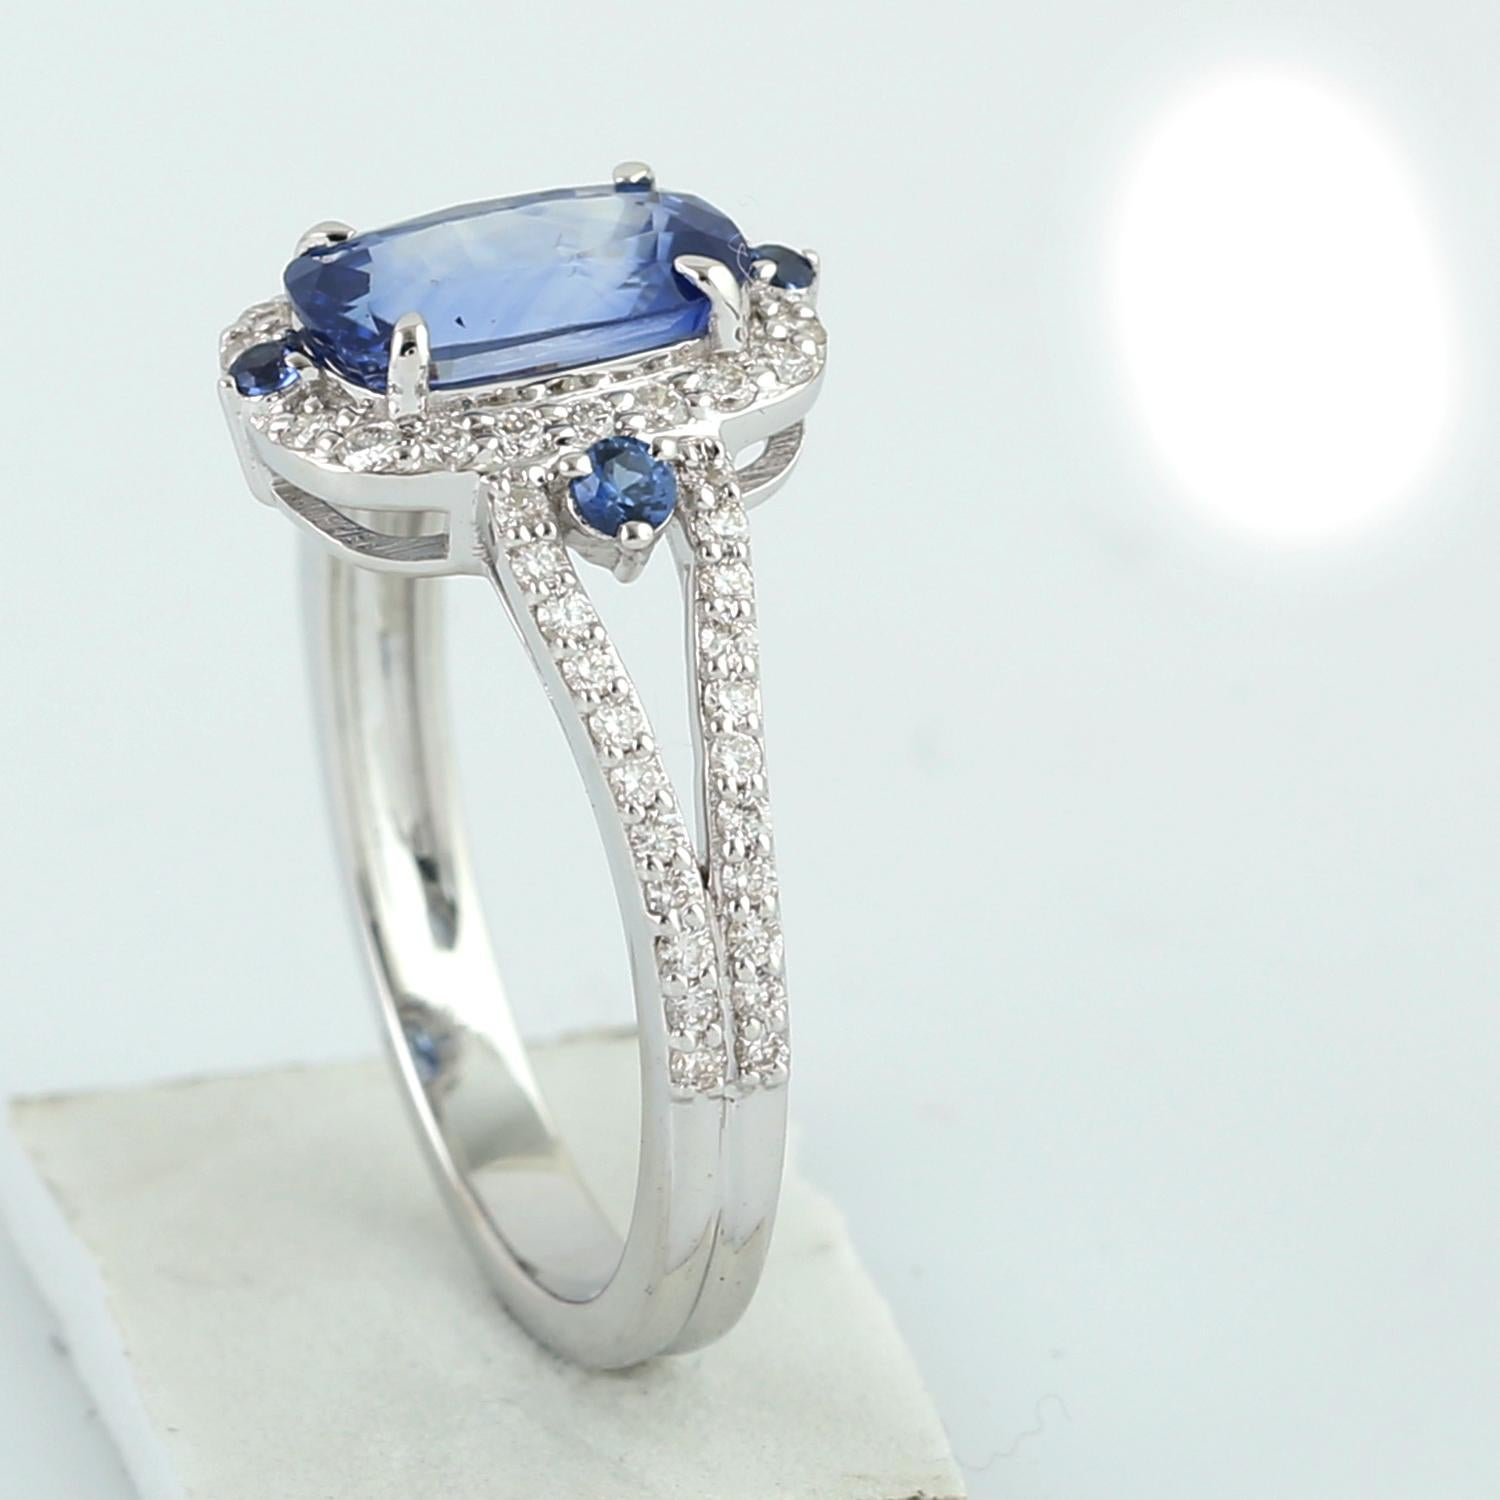 Blue Sapphire Cocktail Ring With Pave Diamonds Made In 18k White Gold In New Condition For Sale In New York, NY